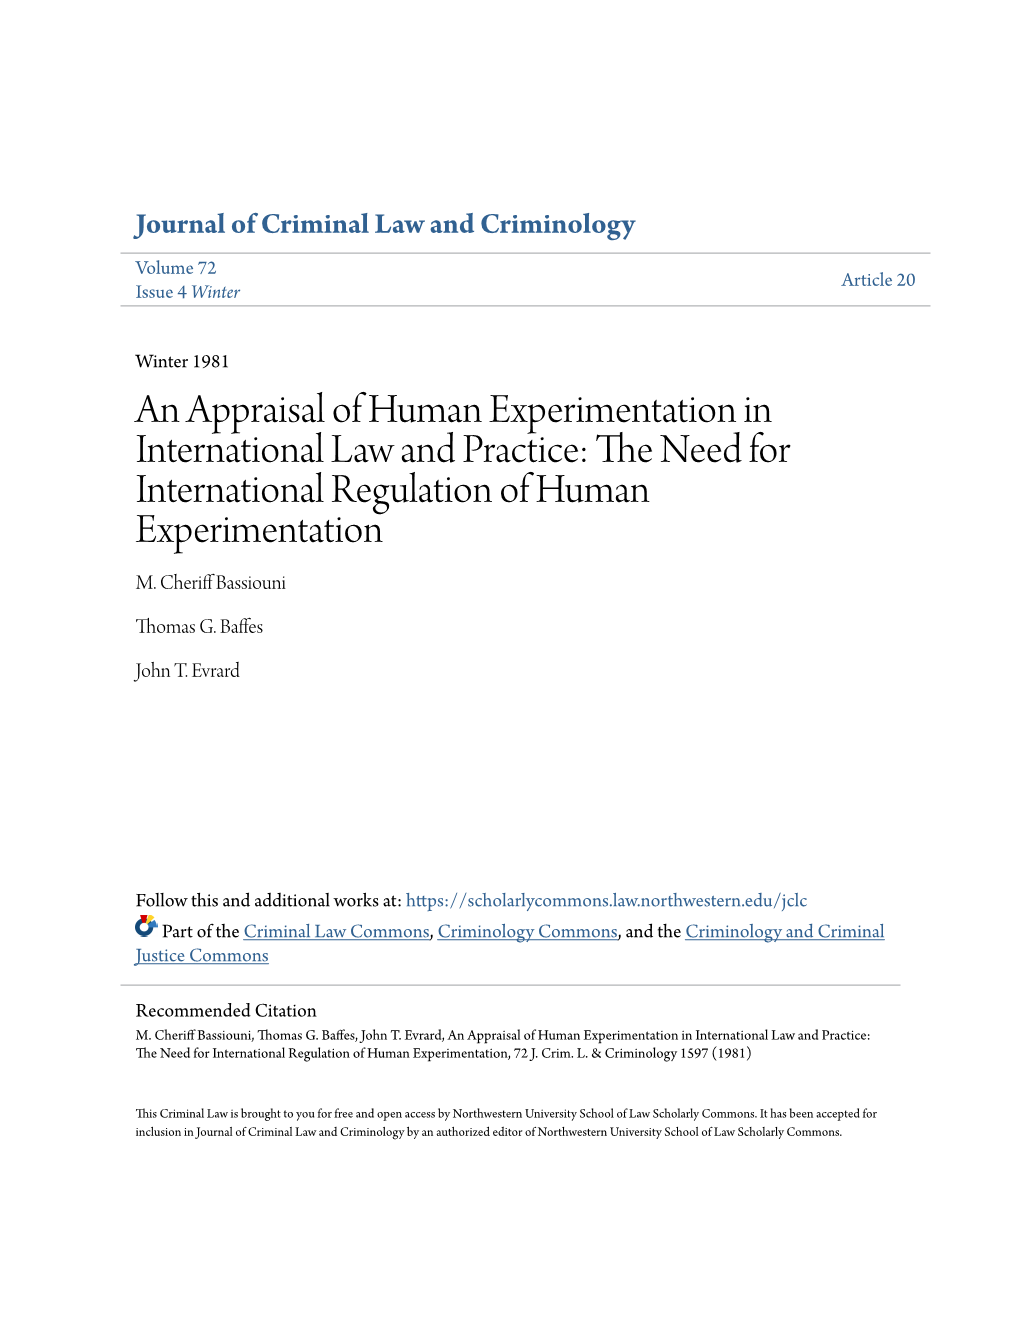 An Appraisal of Human Experimentation in International Law and Practice: the Eedn for International Regulation of Human Experimentation M